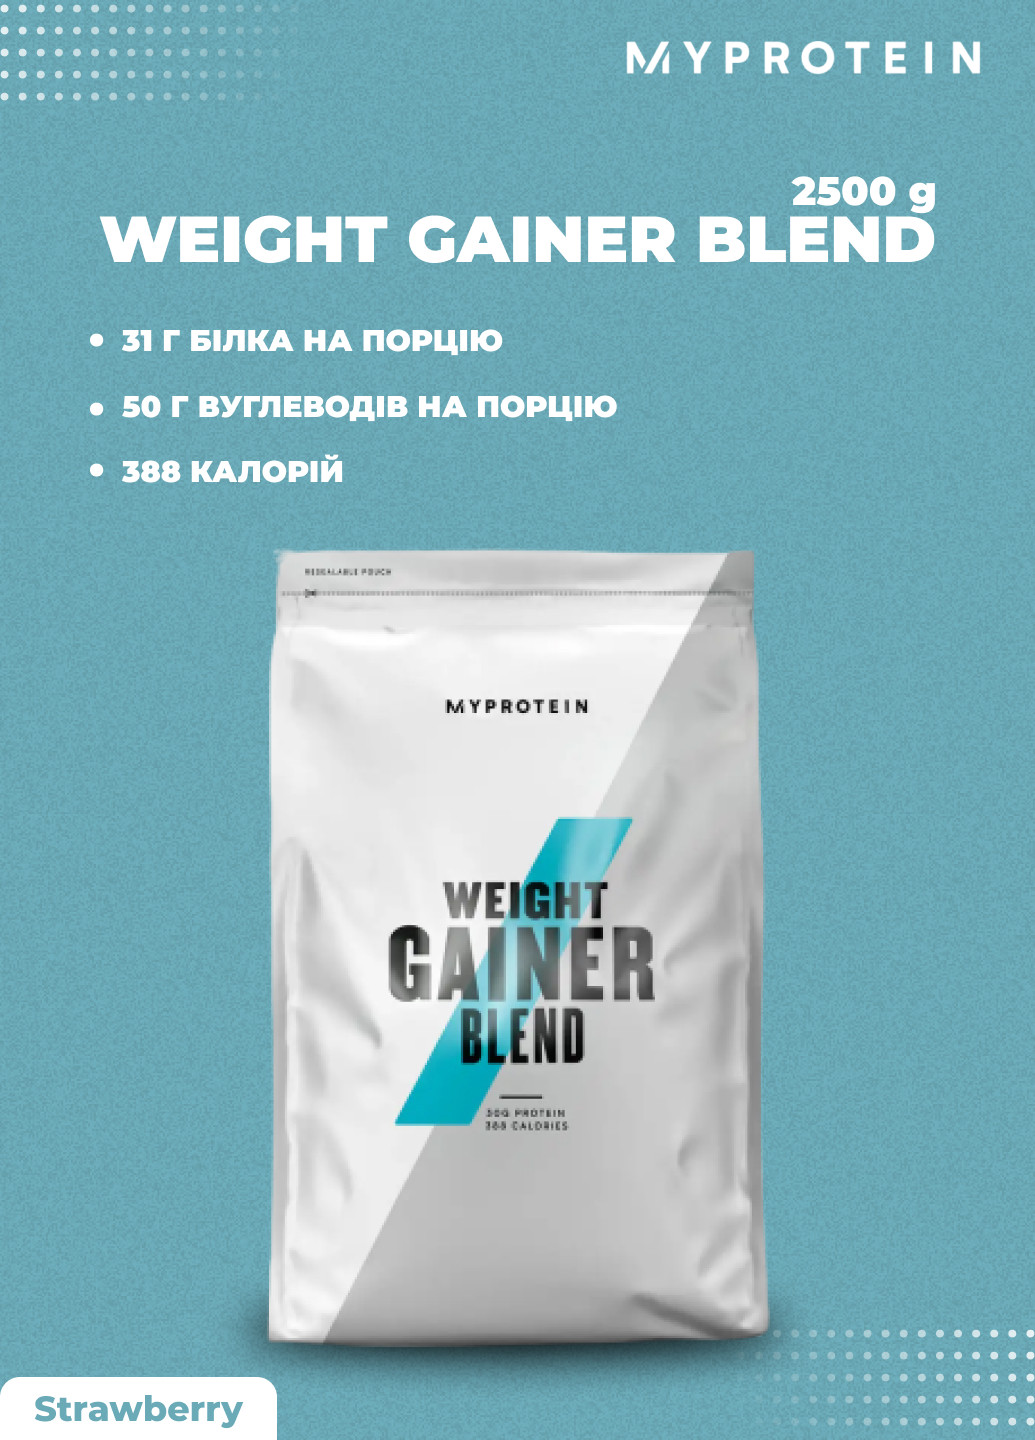 Протеин Weight Gainer Blend - 2500g Strawberry My Protein (252446694)